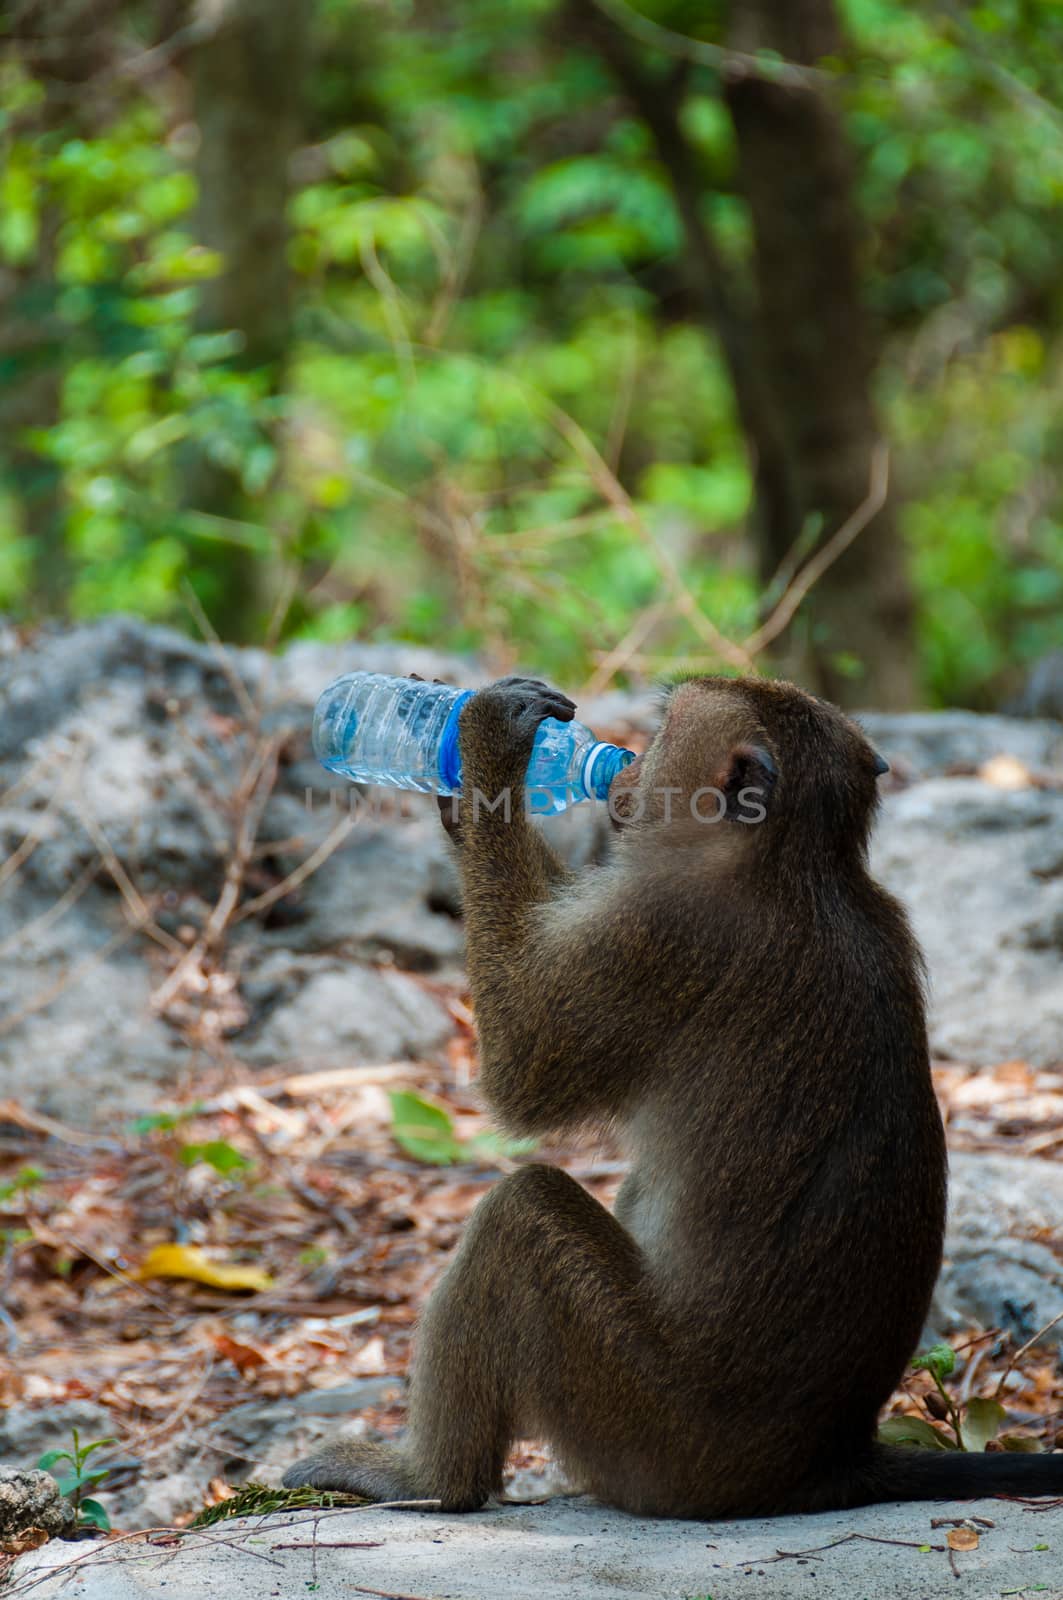 Monkey Rhesus Macaque drinking from a water bottle in Cambodia Asia